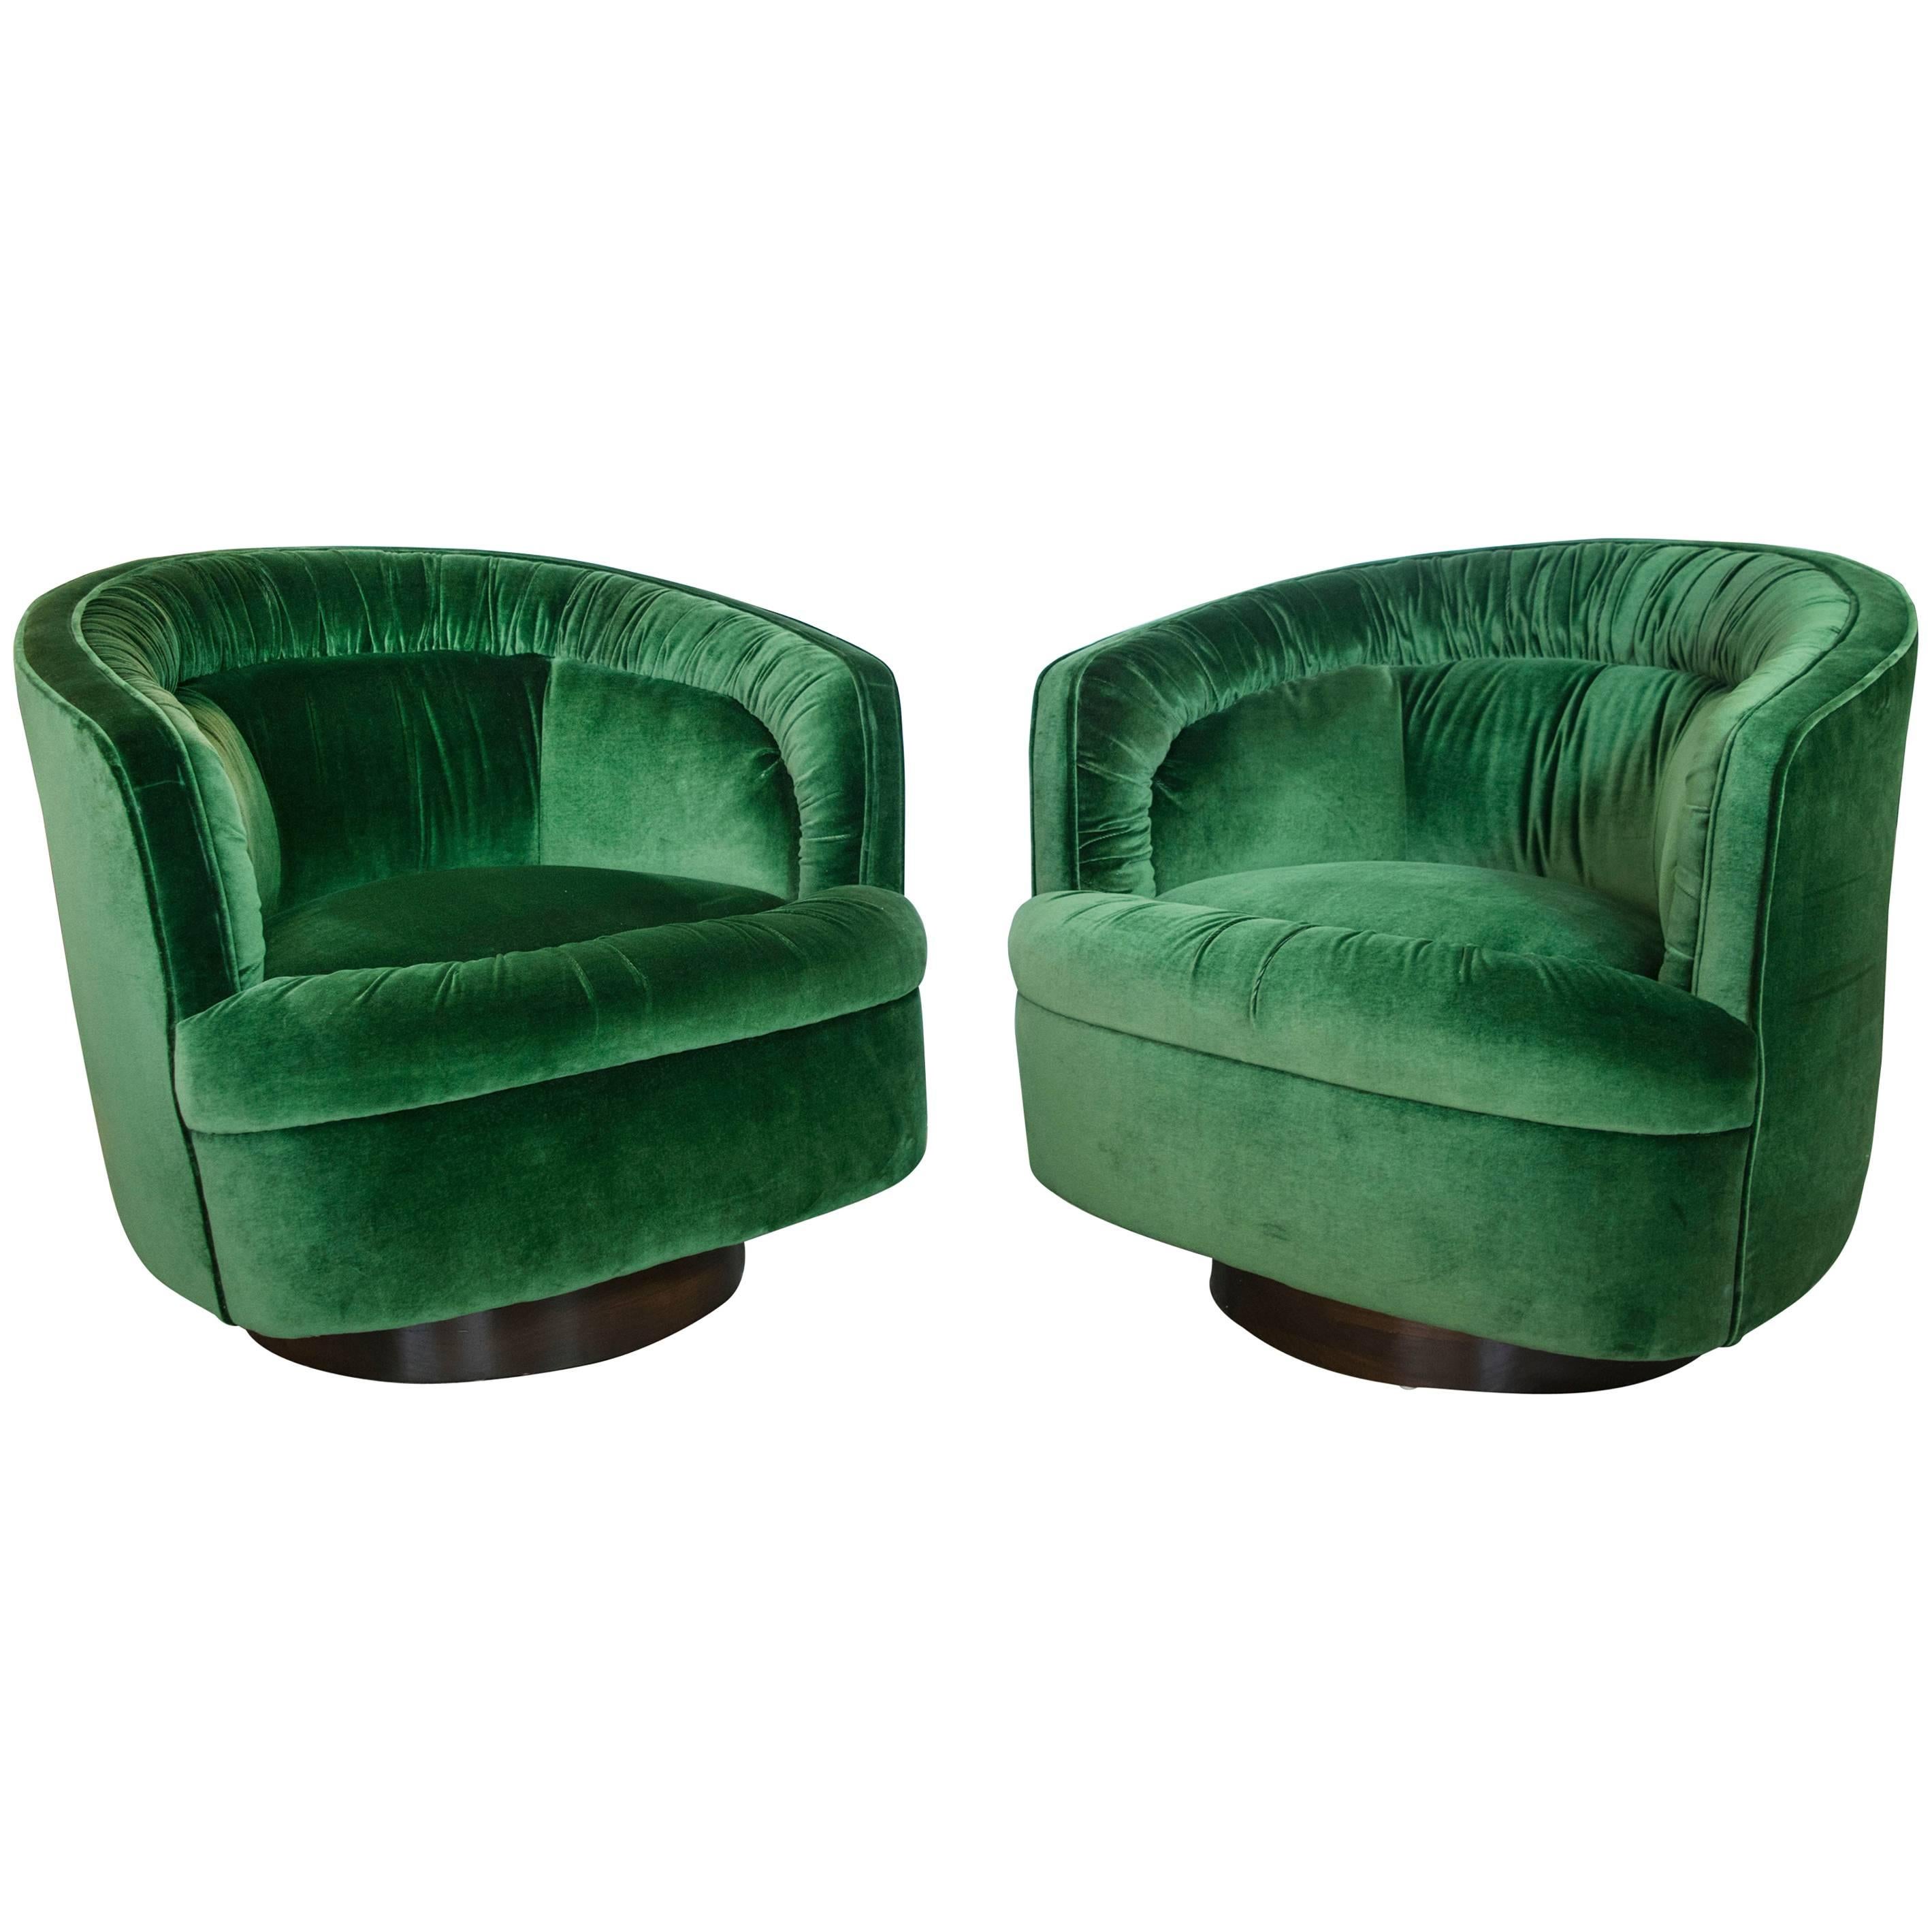 Emerald Green Velvet Swivel Chairs in the Style of Milo Baughman